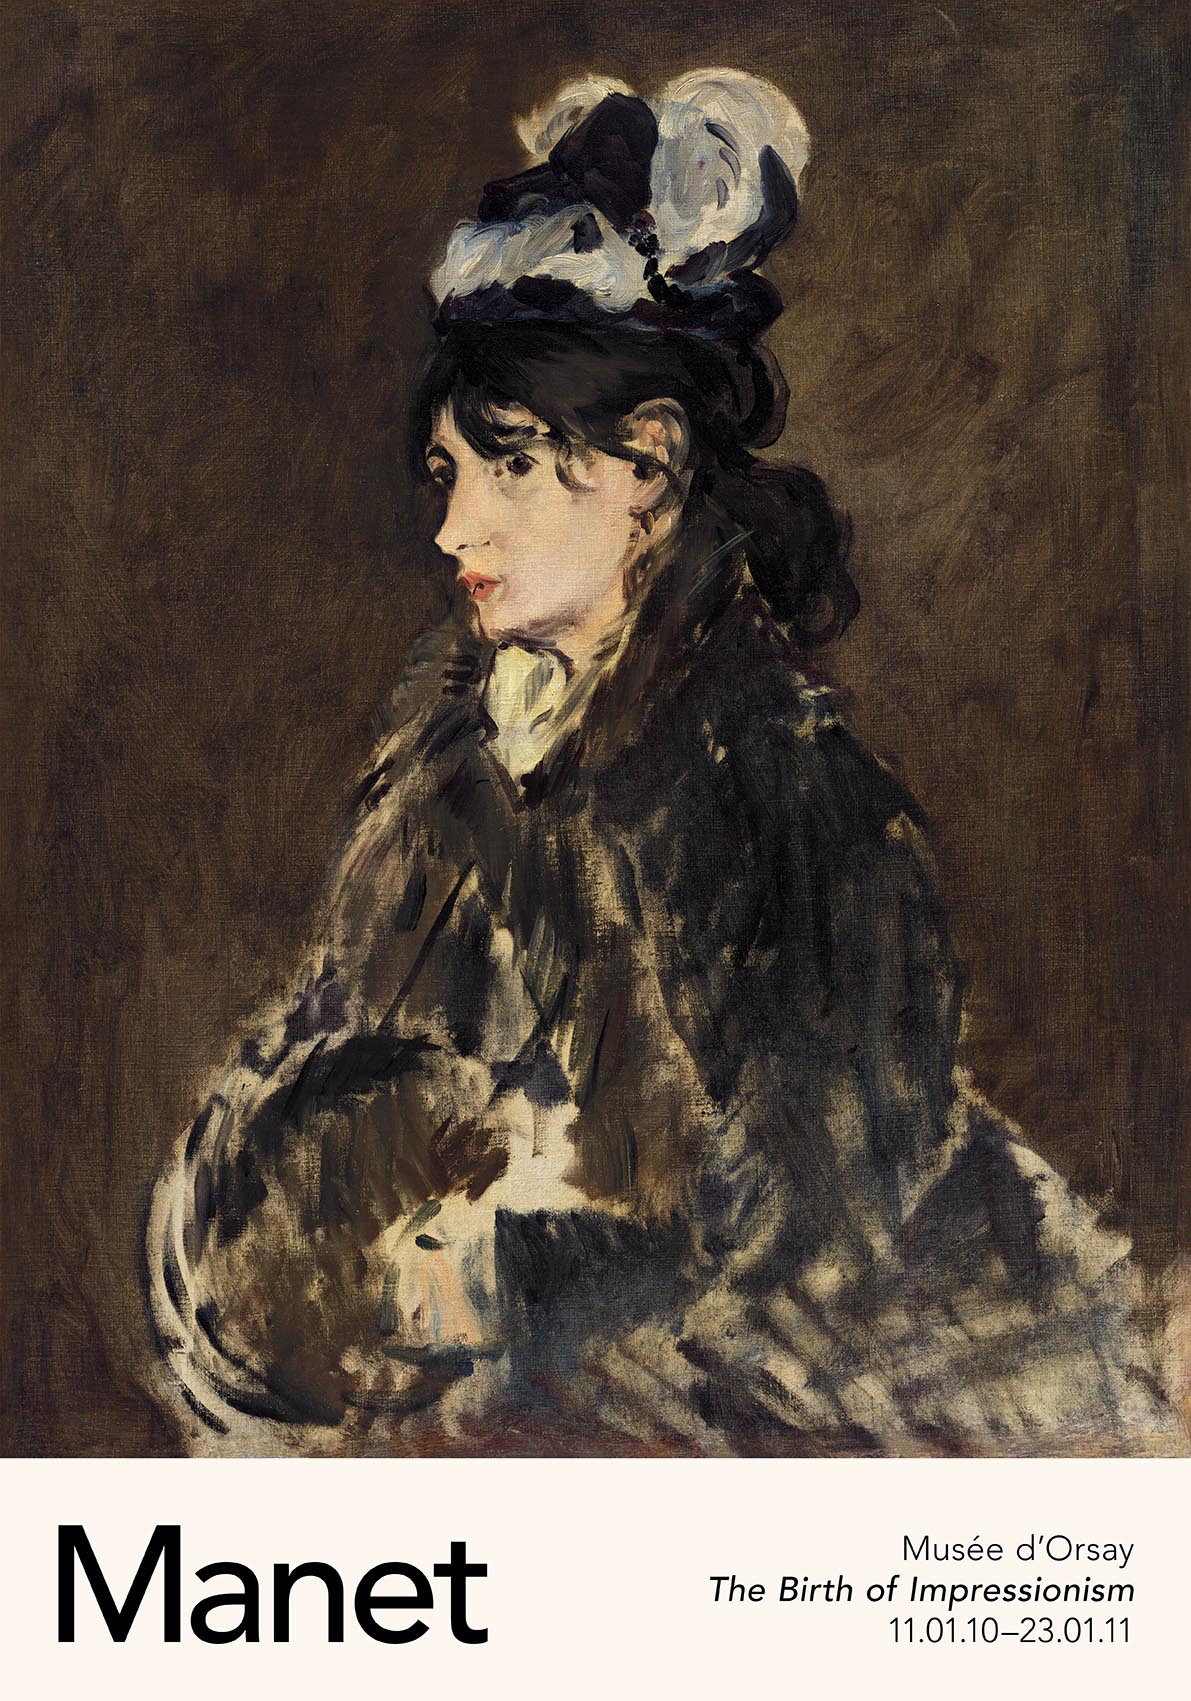 Berthe Morisot Nr 2 by Manet Exhibition Poster